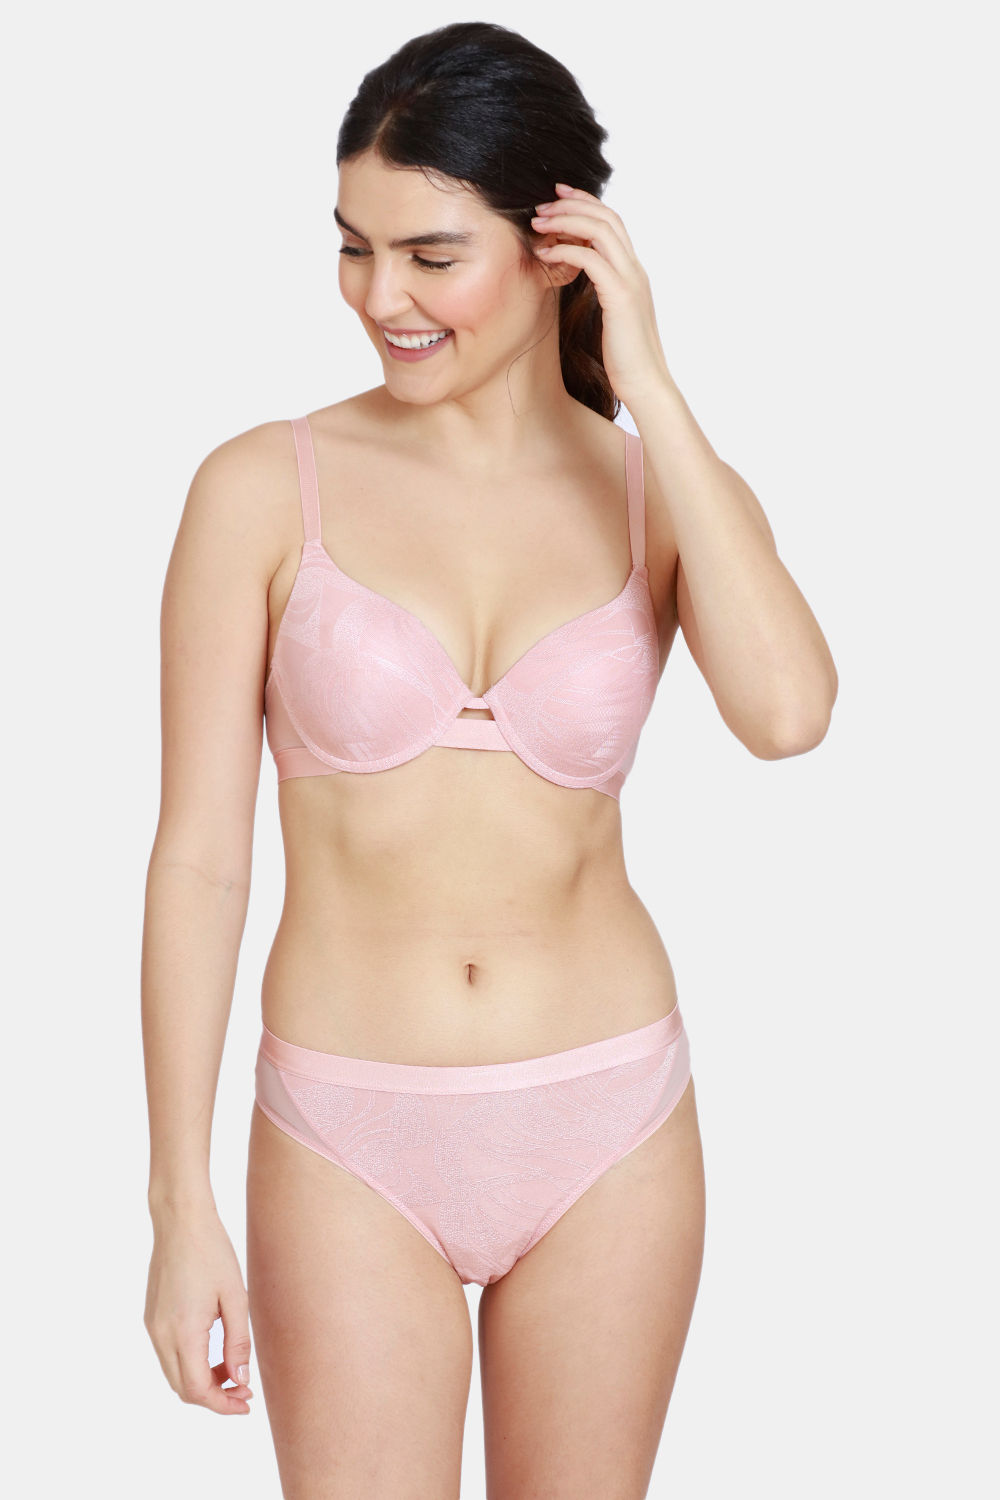 Buy Zivame Jacquard Lace Front Paded Underwired Camisole Bra- Pink (A-D)  Online at Low Prices in India 